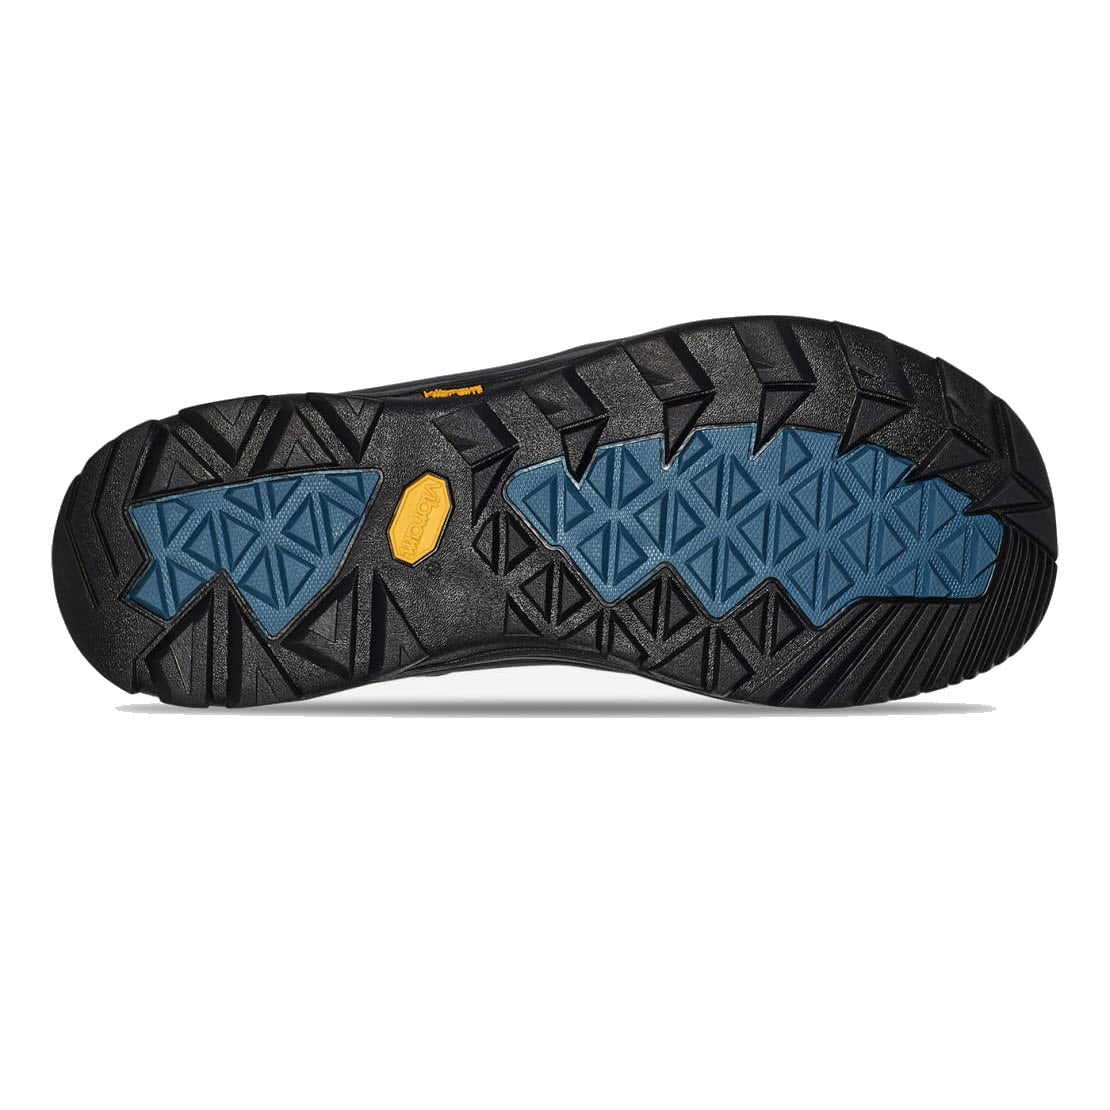 Tread pattern of a Teva hiking boot sole, featuring black and blue geometric designs with a rectangular yellow logo, designed for the modern-day hiker.